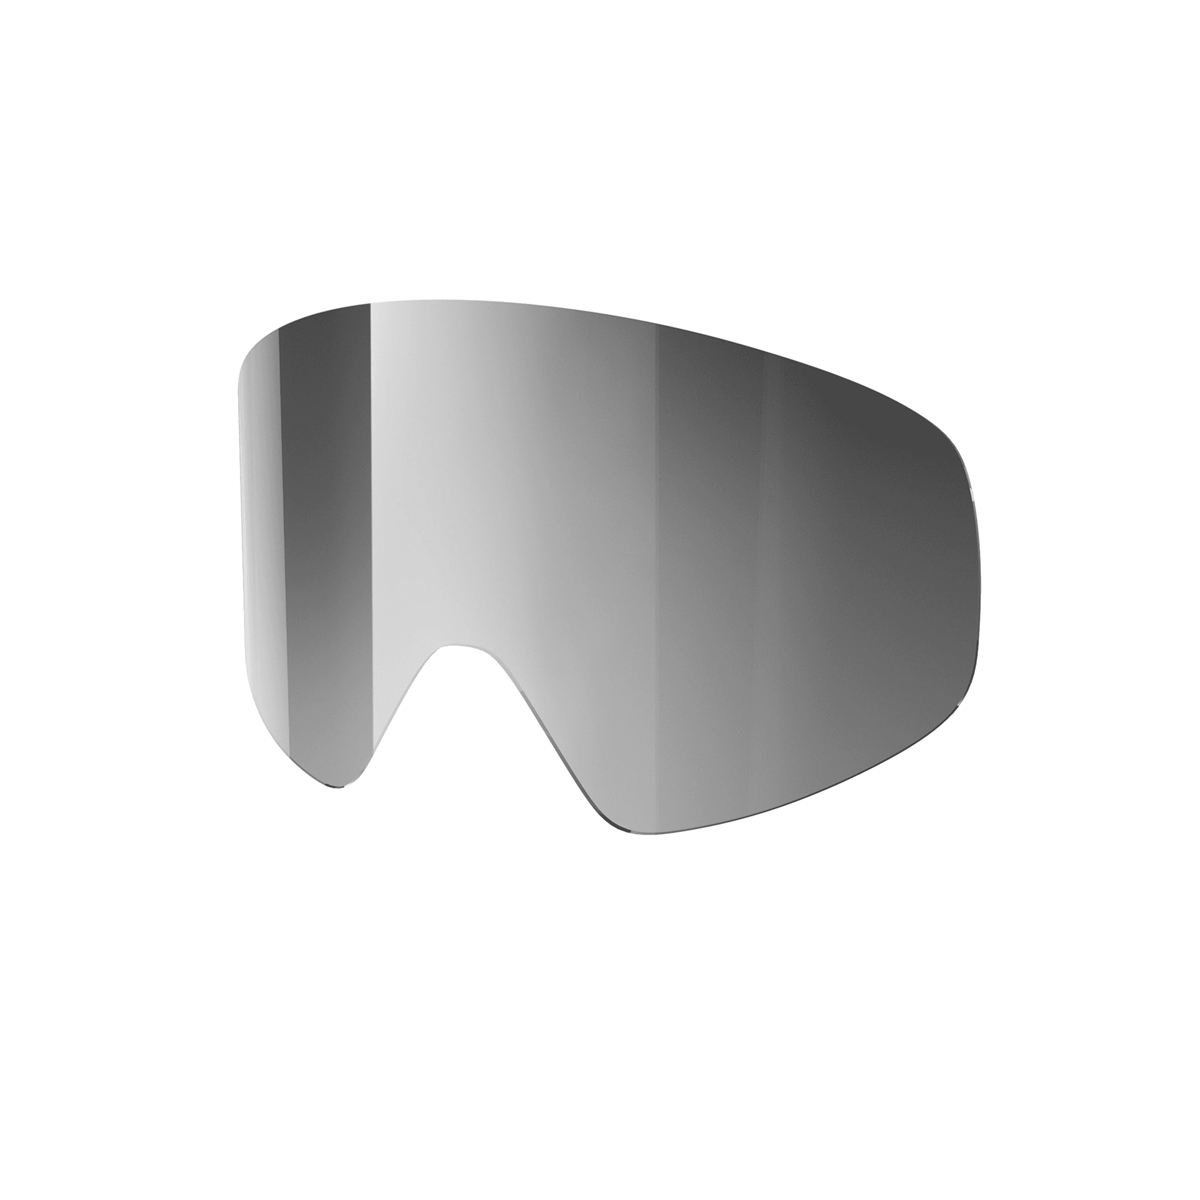 Replacement grey lens for Ora goggles